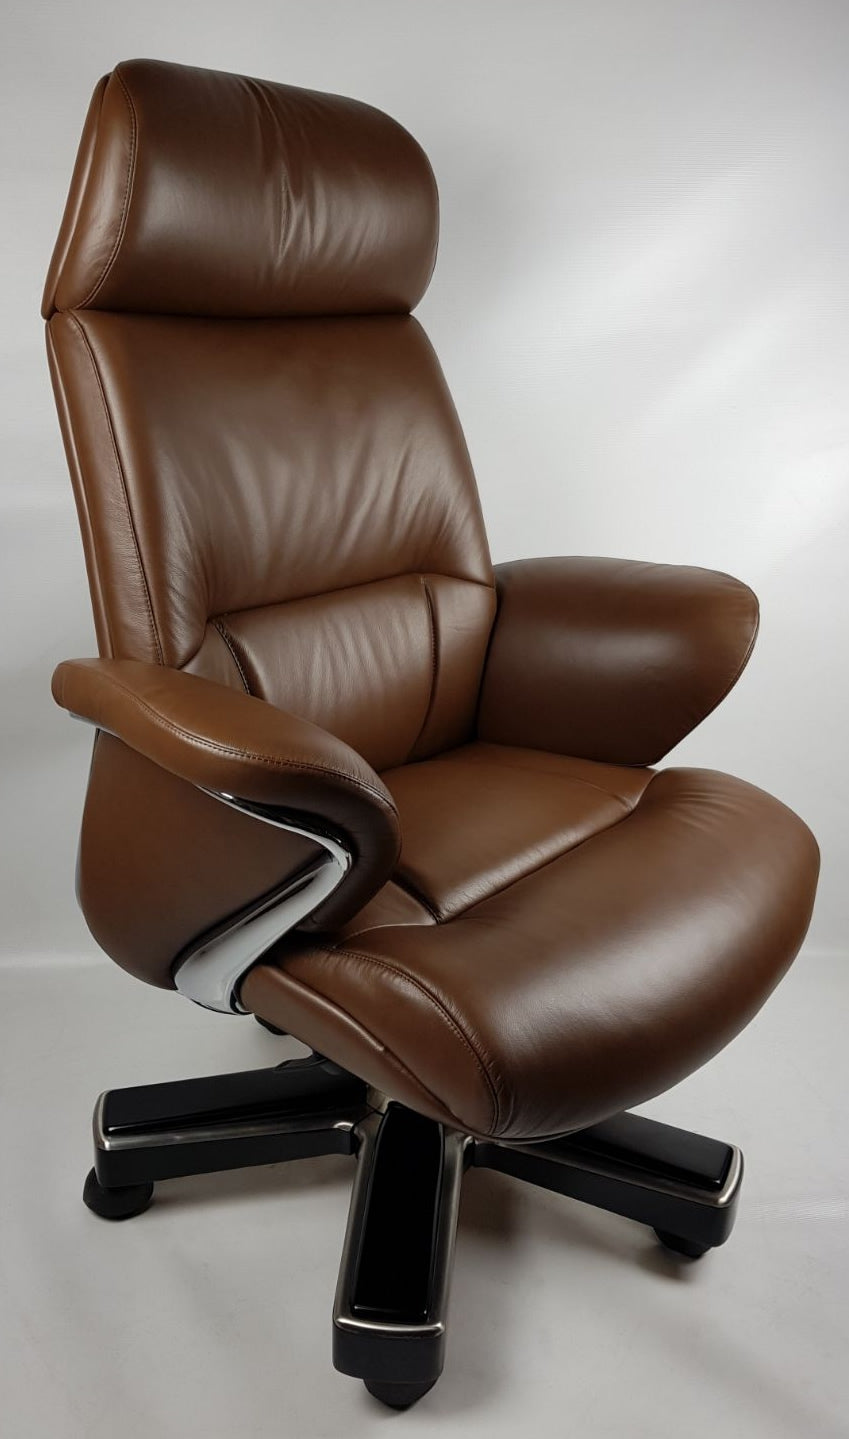 Large Luxury Executive Office Chair with Genuine Brown Leather - YS1605A Huddersfield